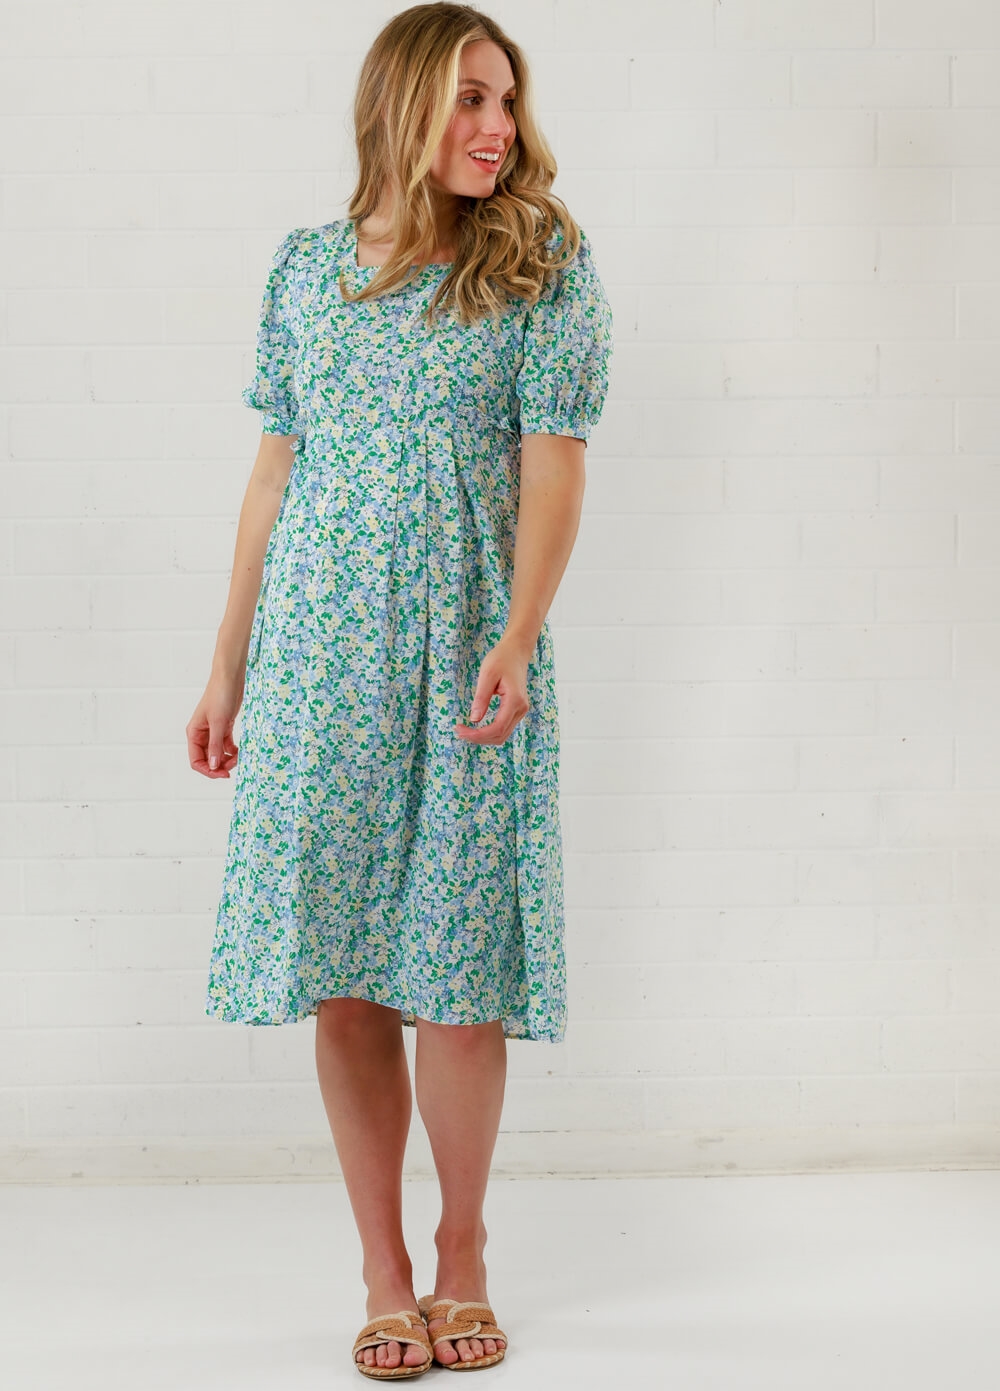 Lait & Co - Lea-Claire Maternity Dress in Green Floral